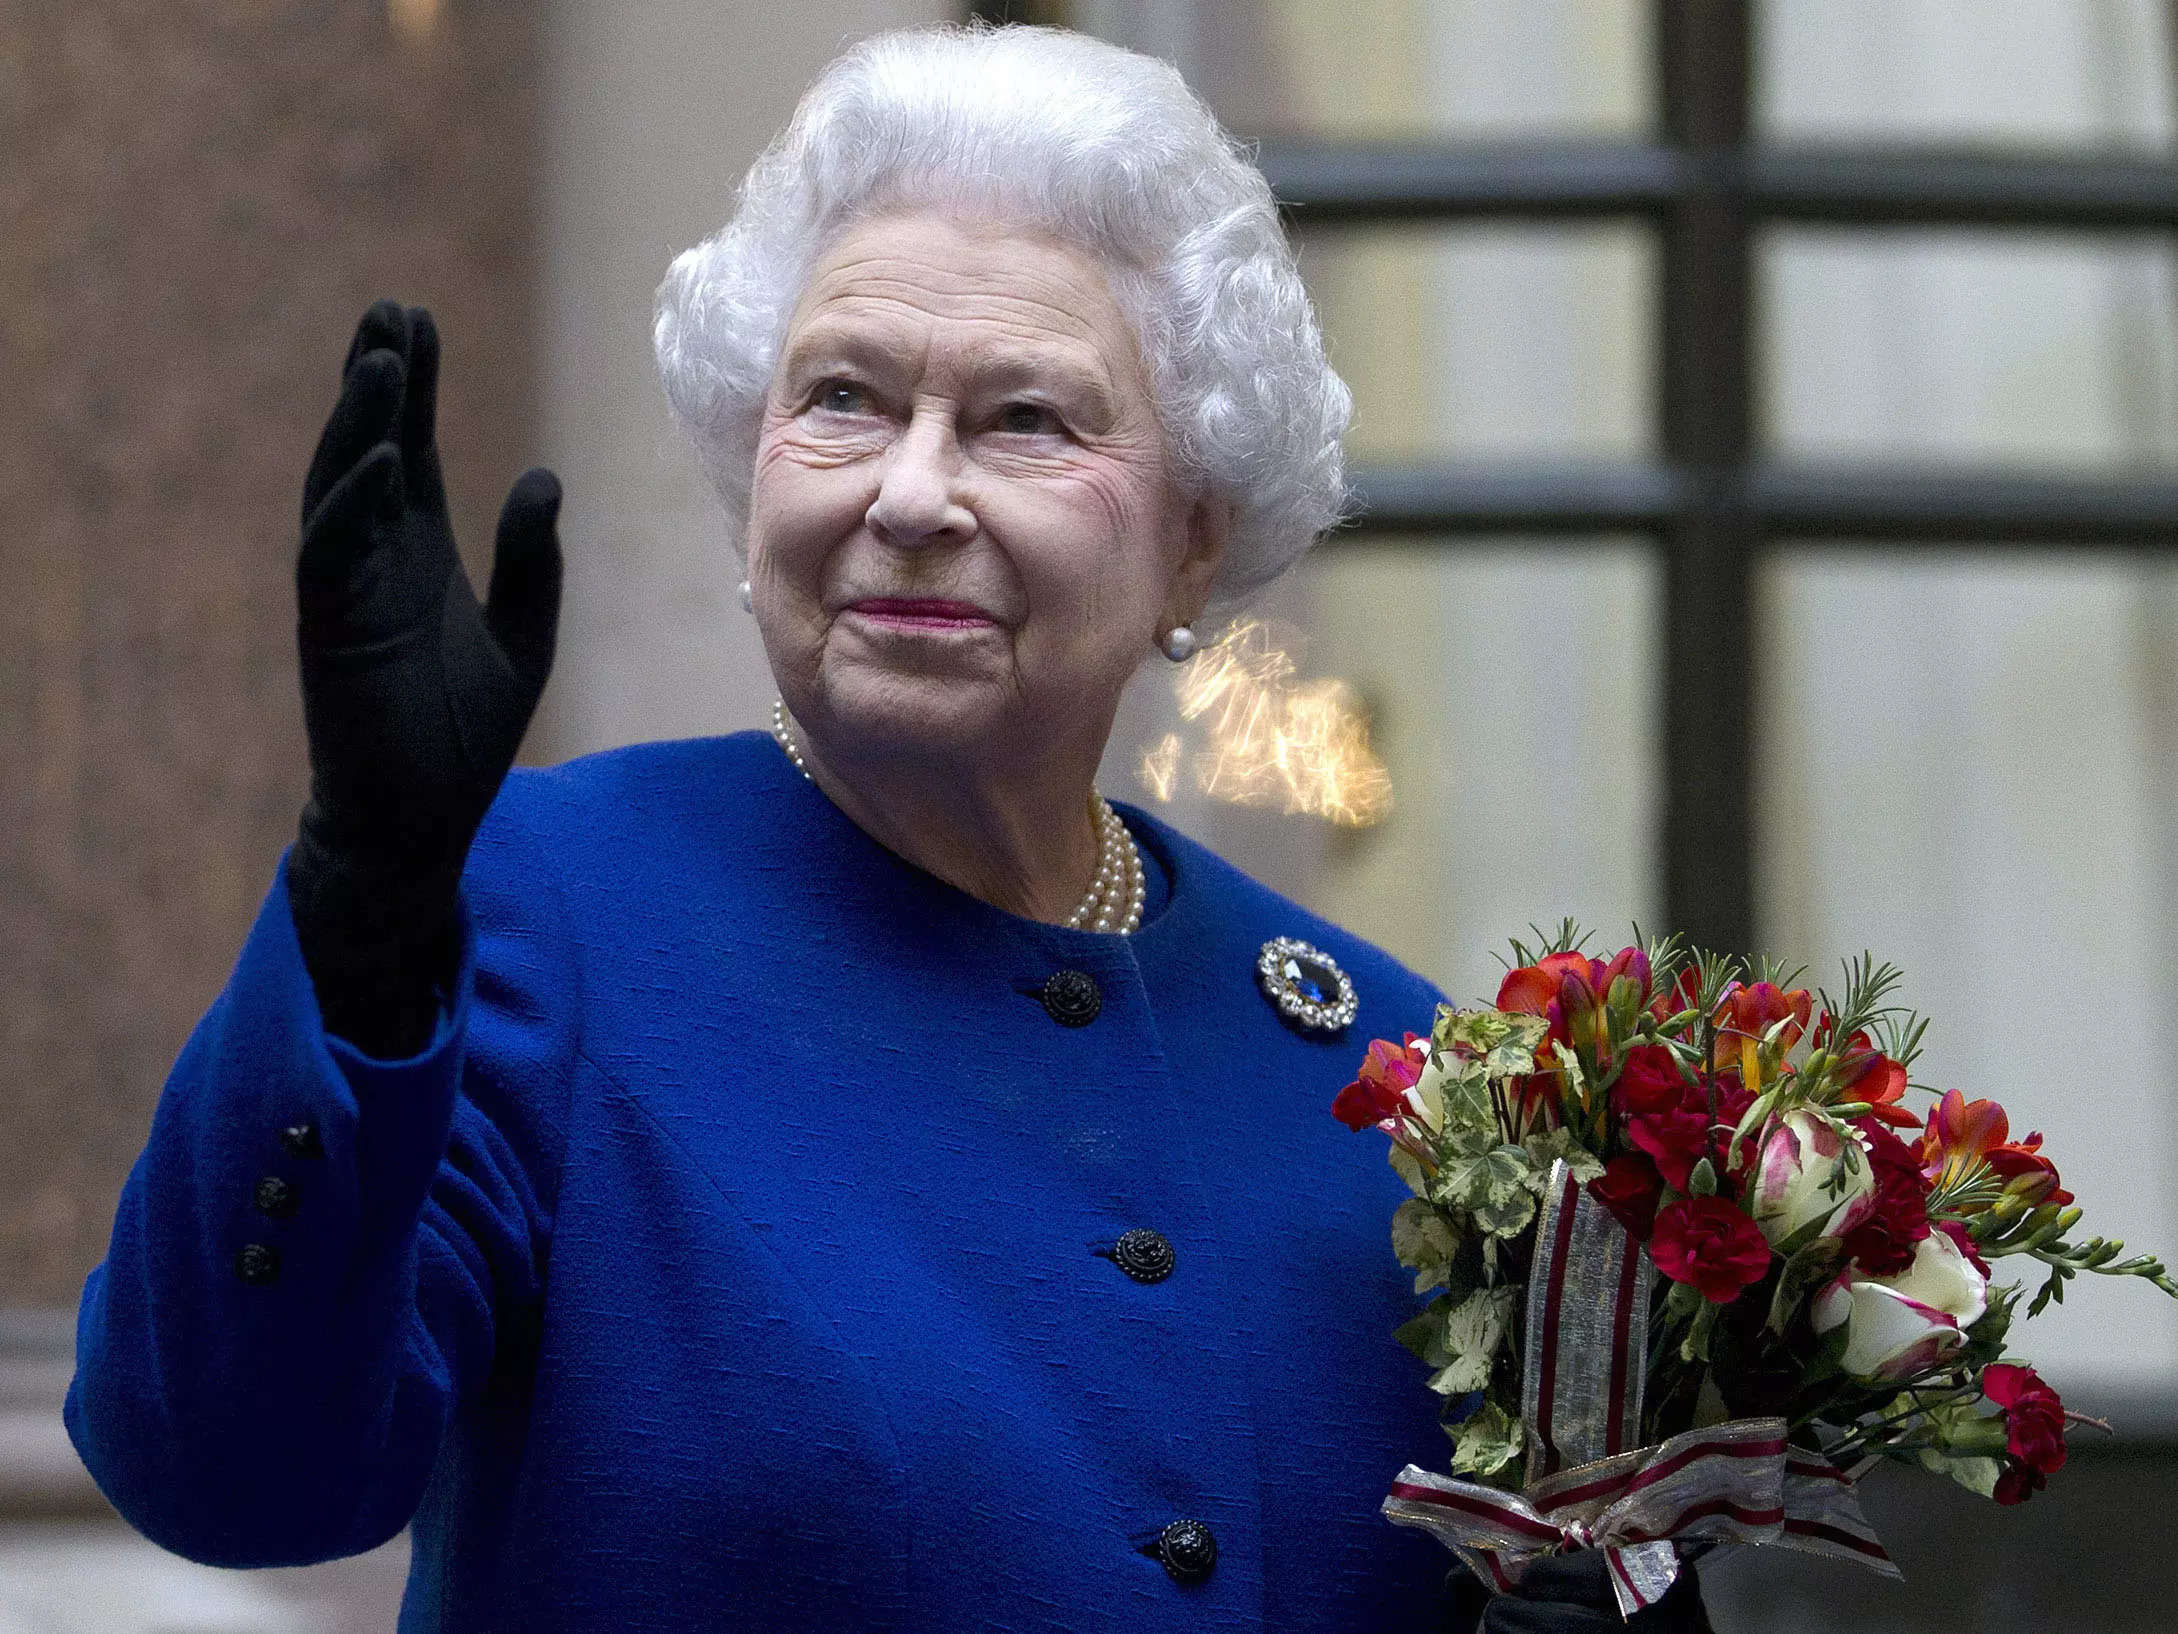 Queen Elizabeth II dies King Charles III vows to continue queens lifelong service thanks darling mama